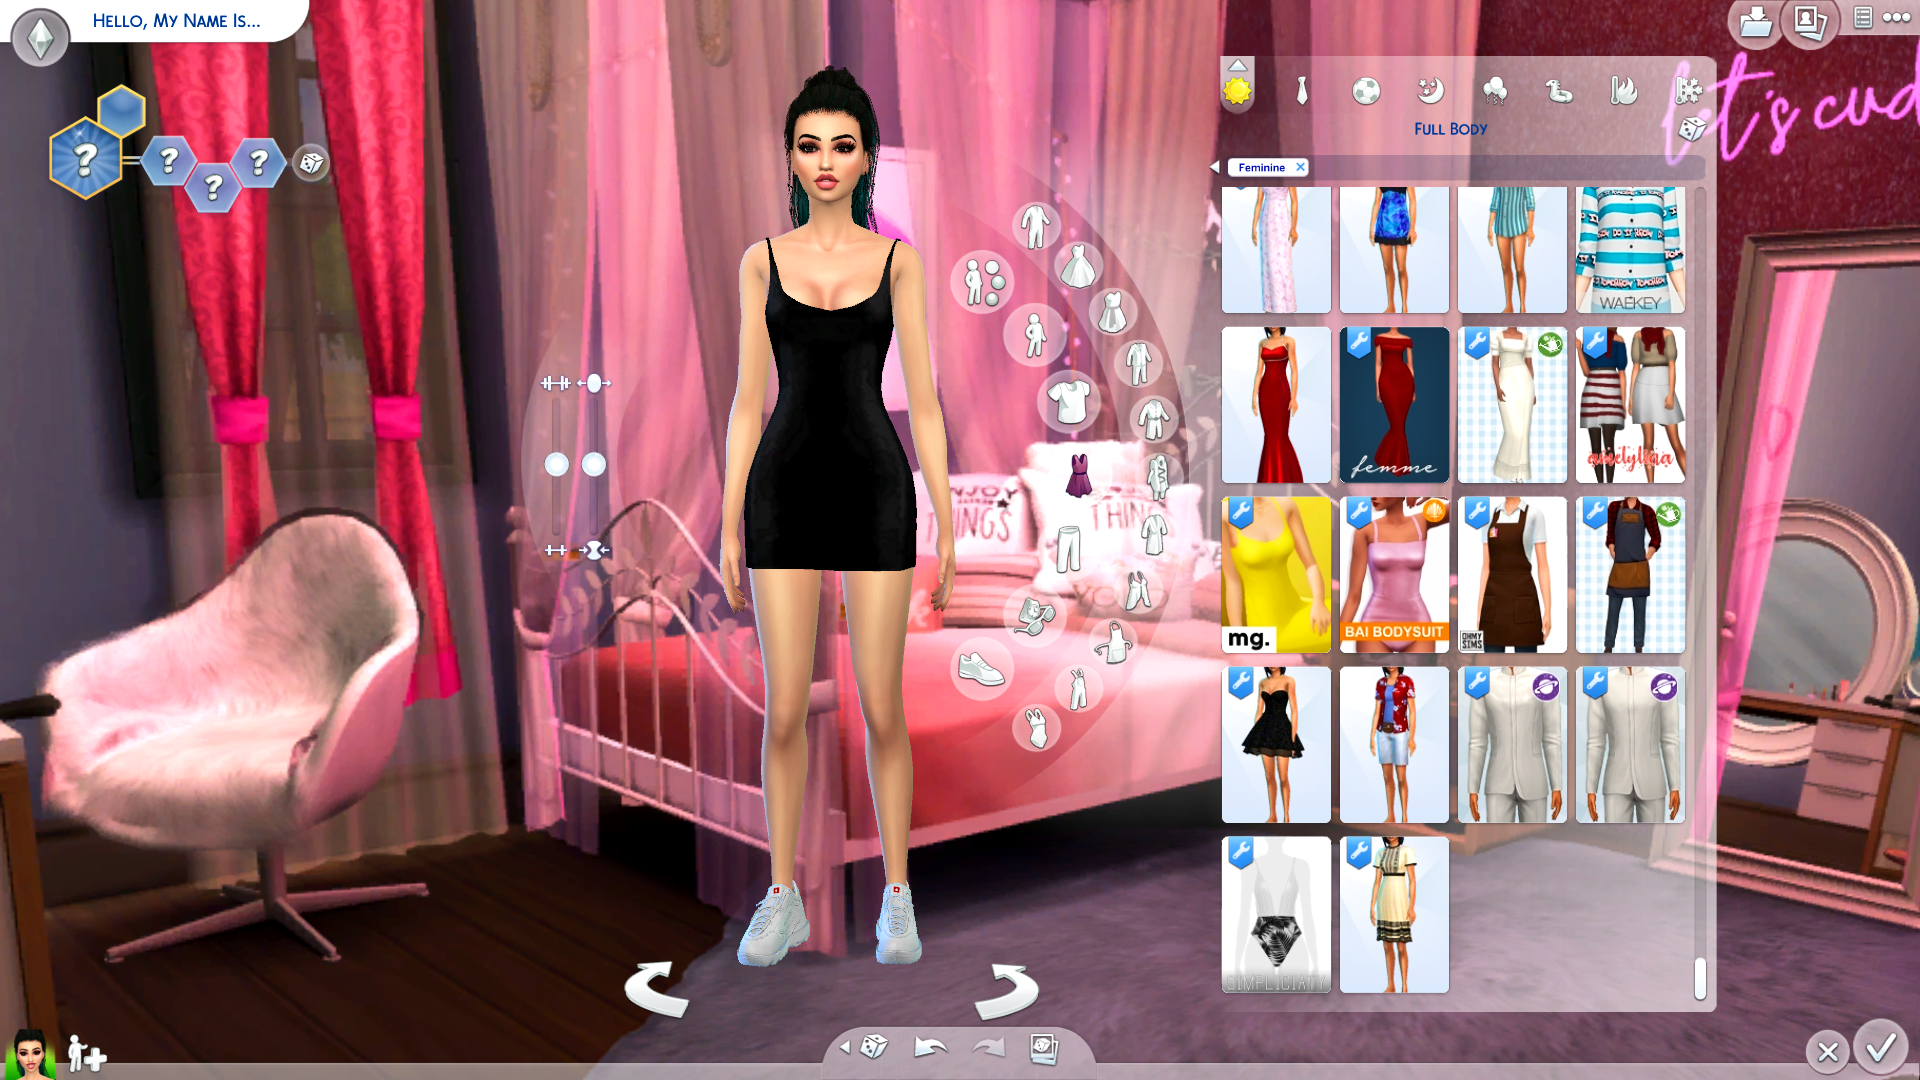 Mod The Sims Pink Bedroom Cas Background.